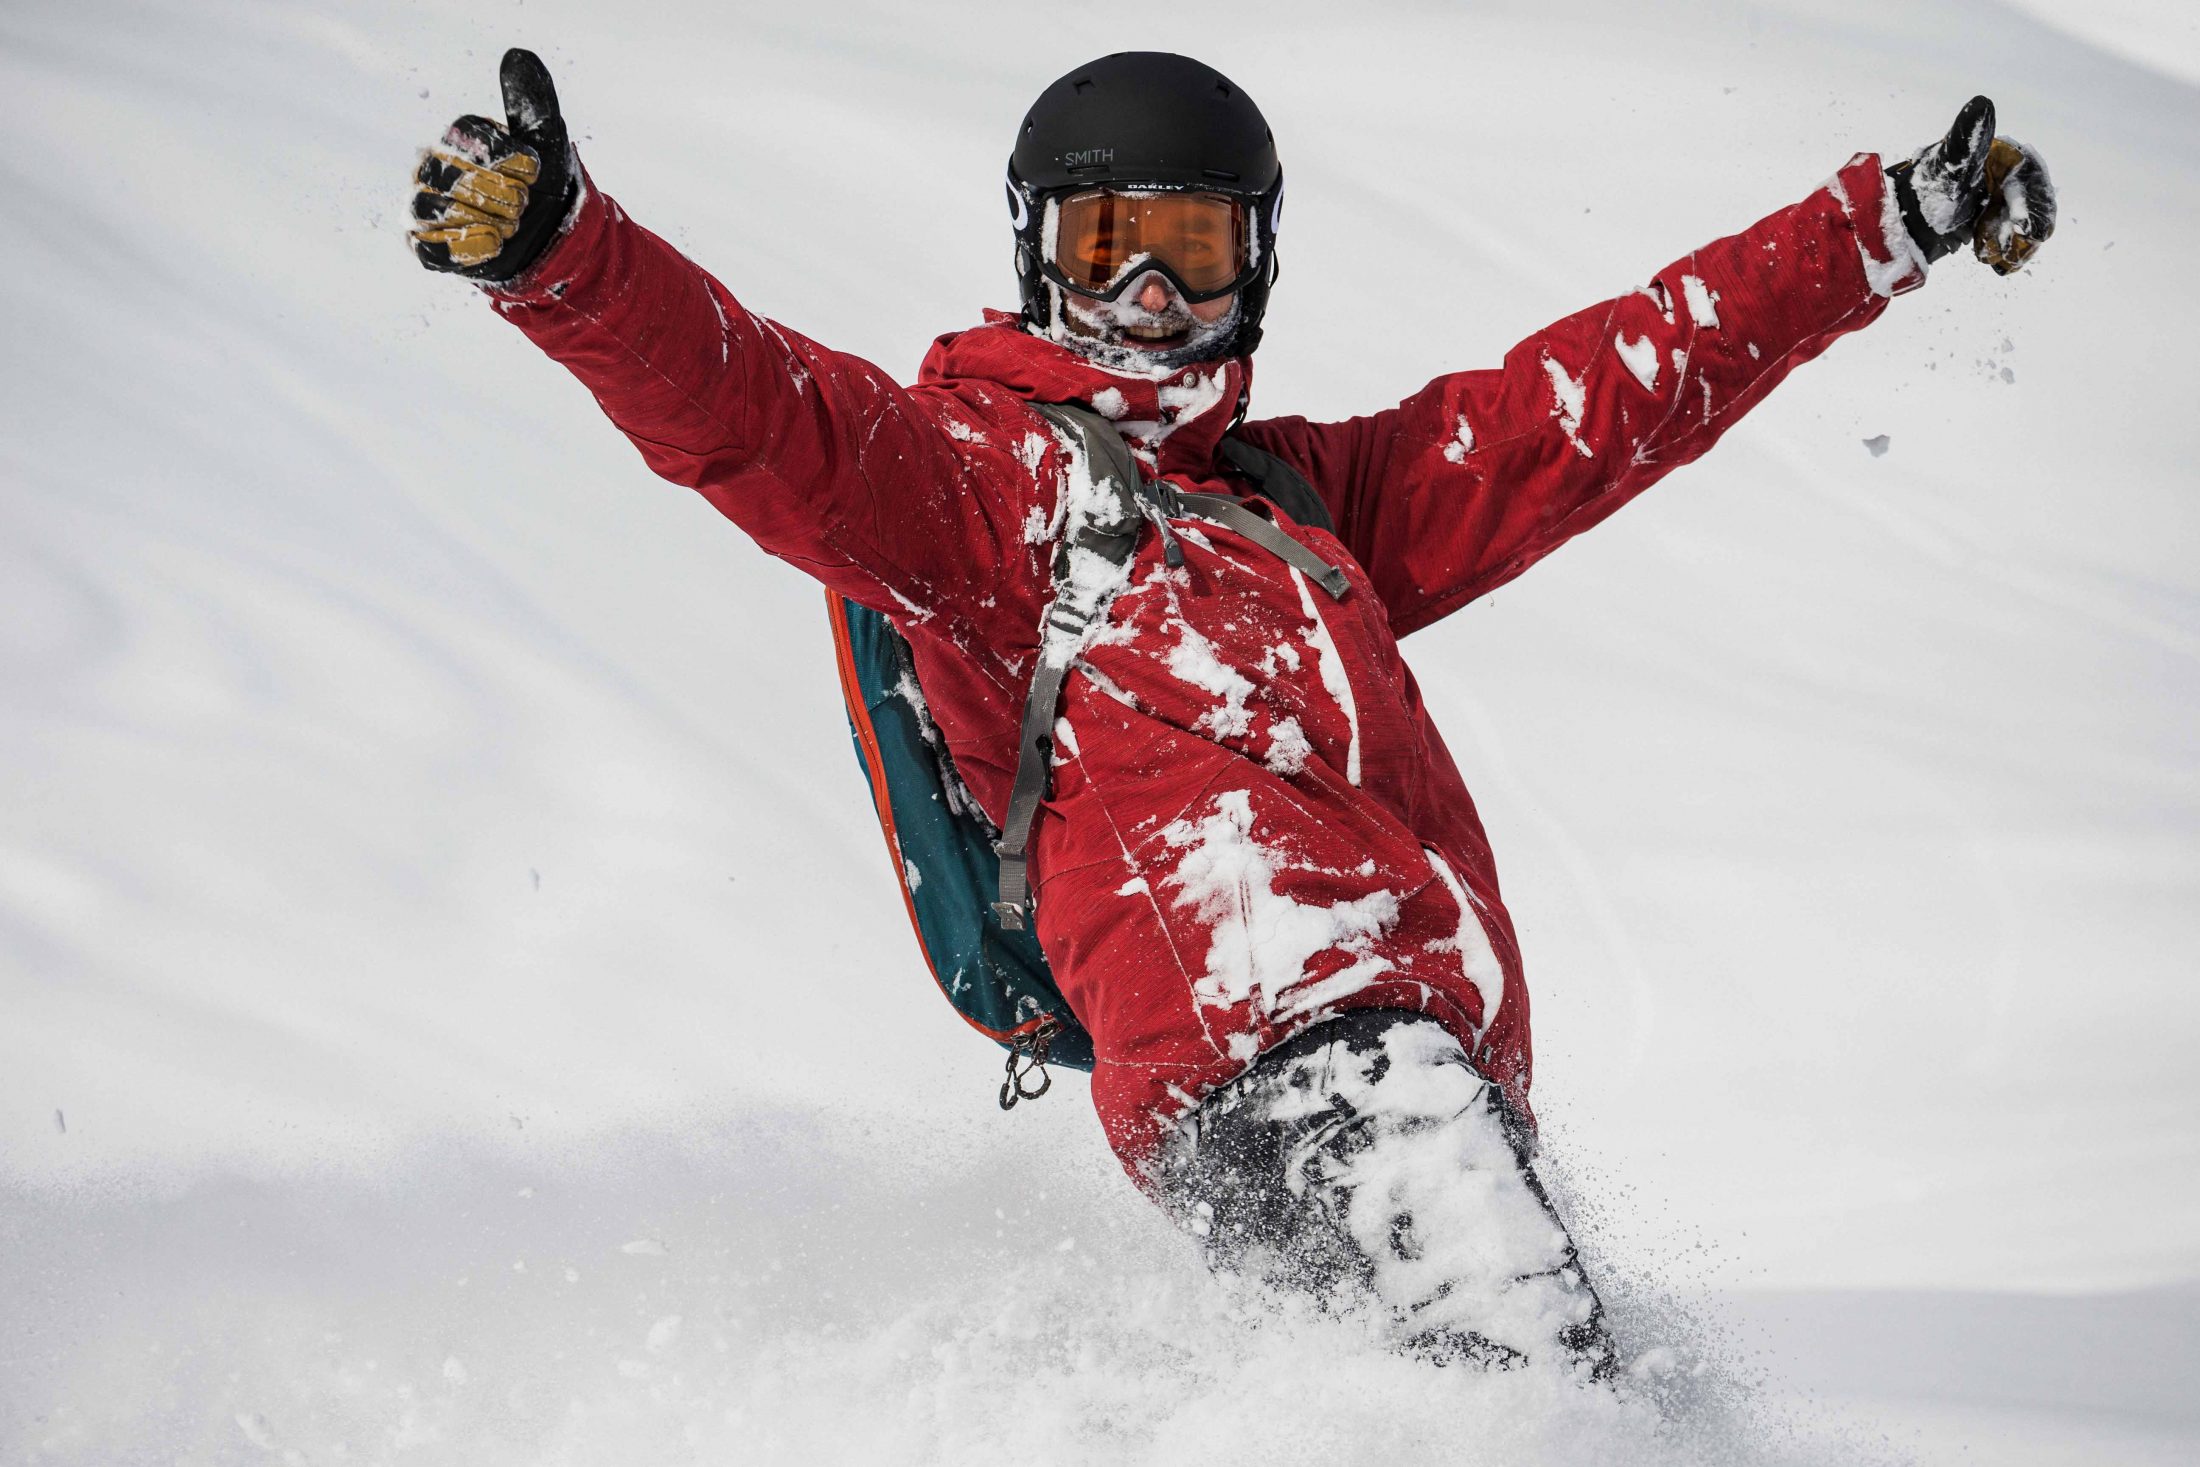 A snowboarder wearing a red jacket giving two thumbs up